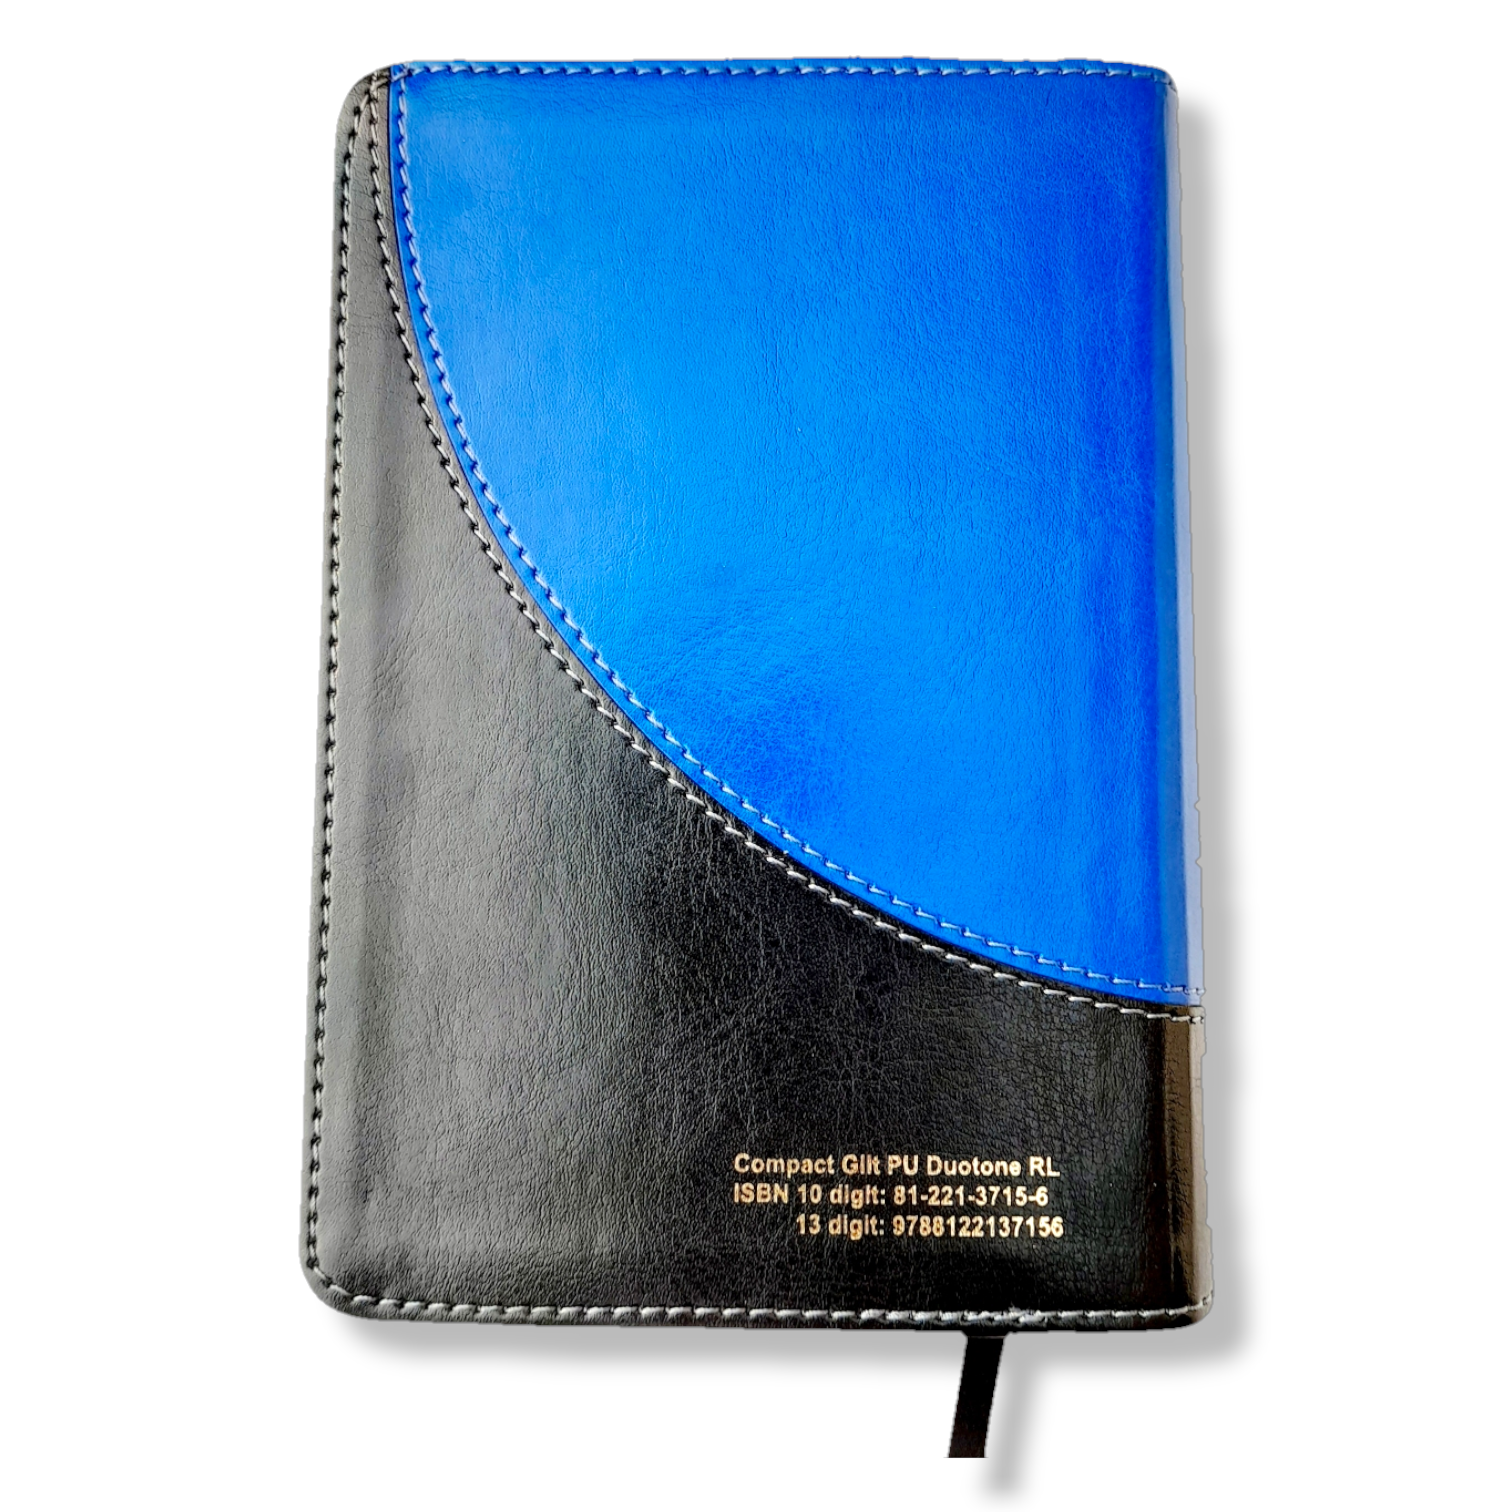 2011 NIV Compact Pocket Cross Bible Charcoal IDT Leather Shrink-wrapped for  sale online